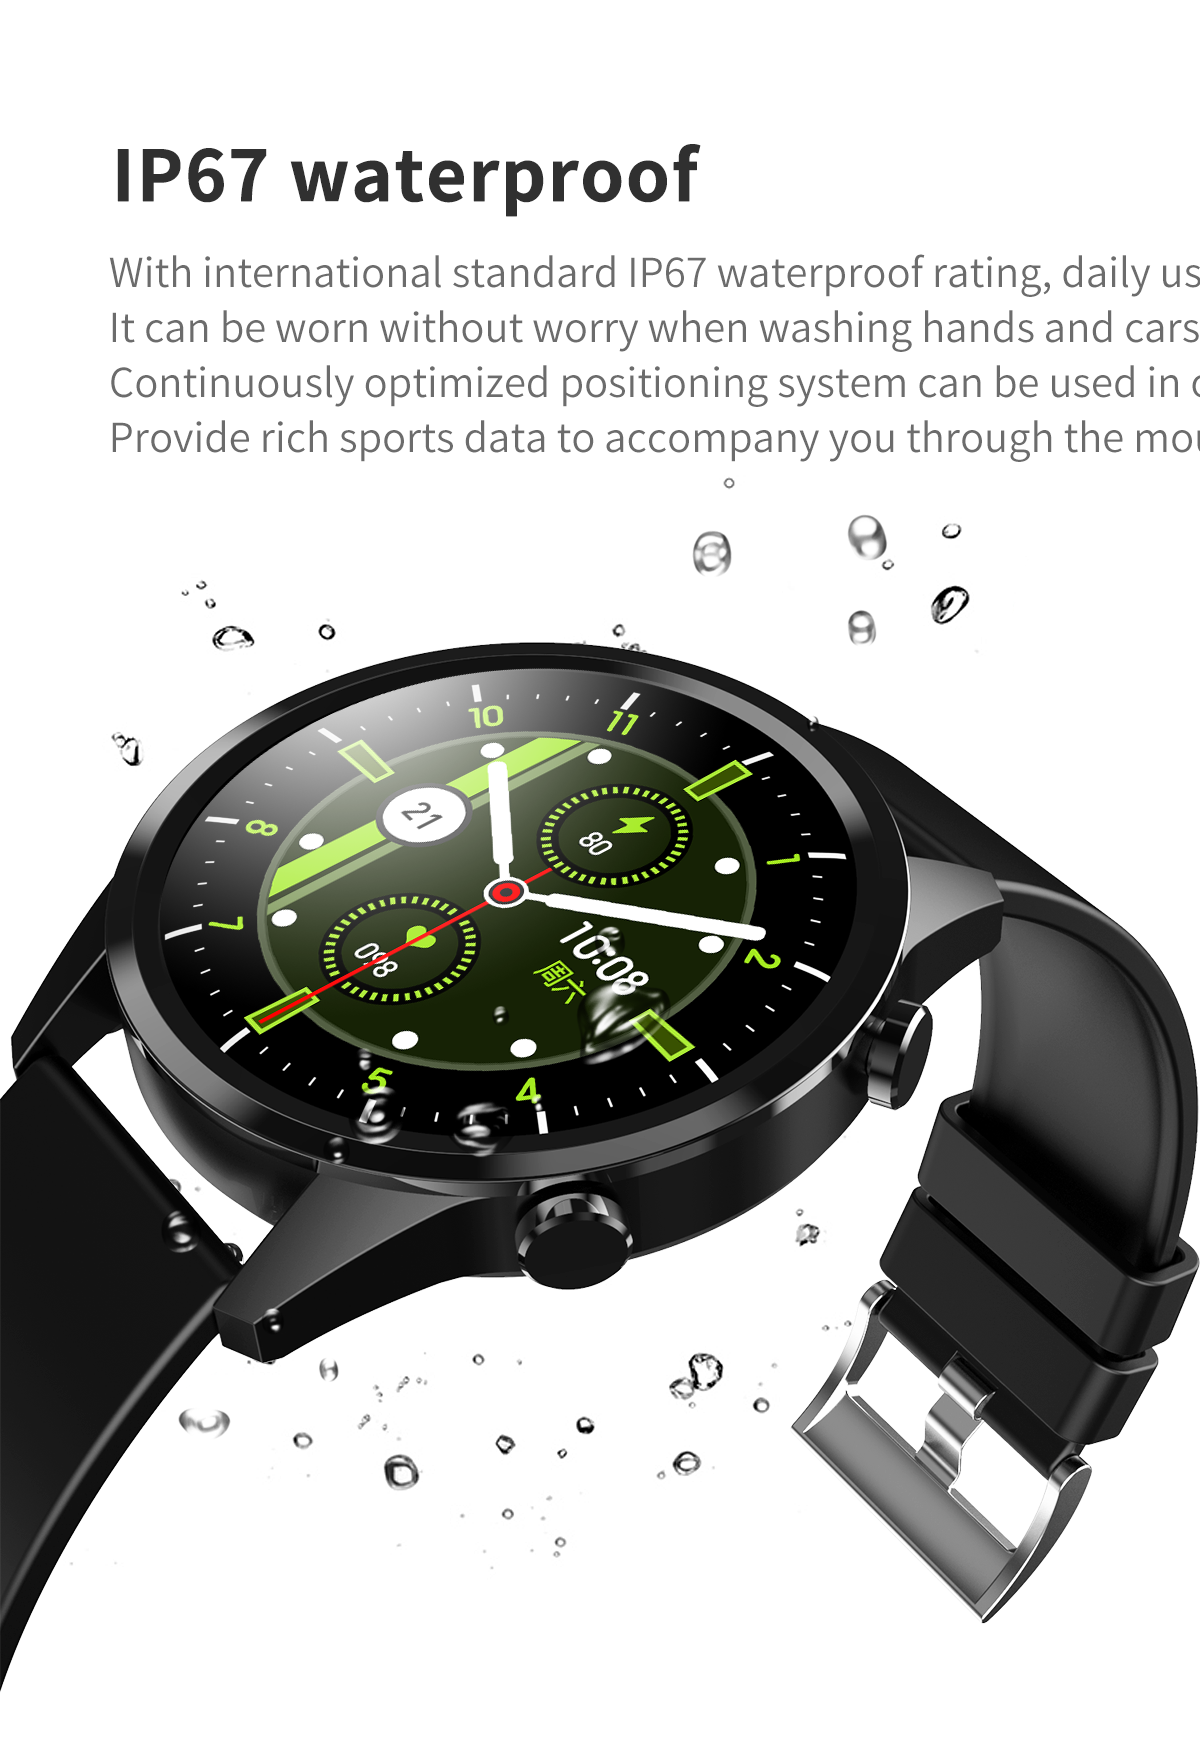 [bluetooth Calling] Bakeey F35 Dual UI Display Heart Rate Blood Pressure Oxygen Monitor Music Control Custom Dial Weather Display Smart Watch